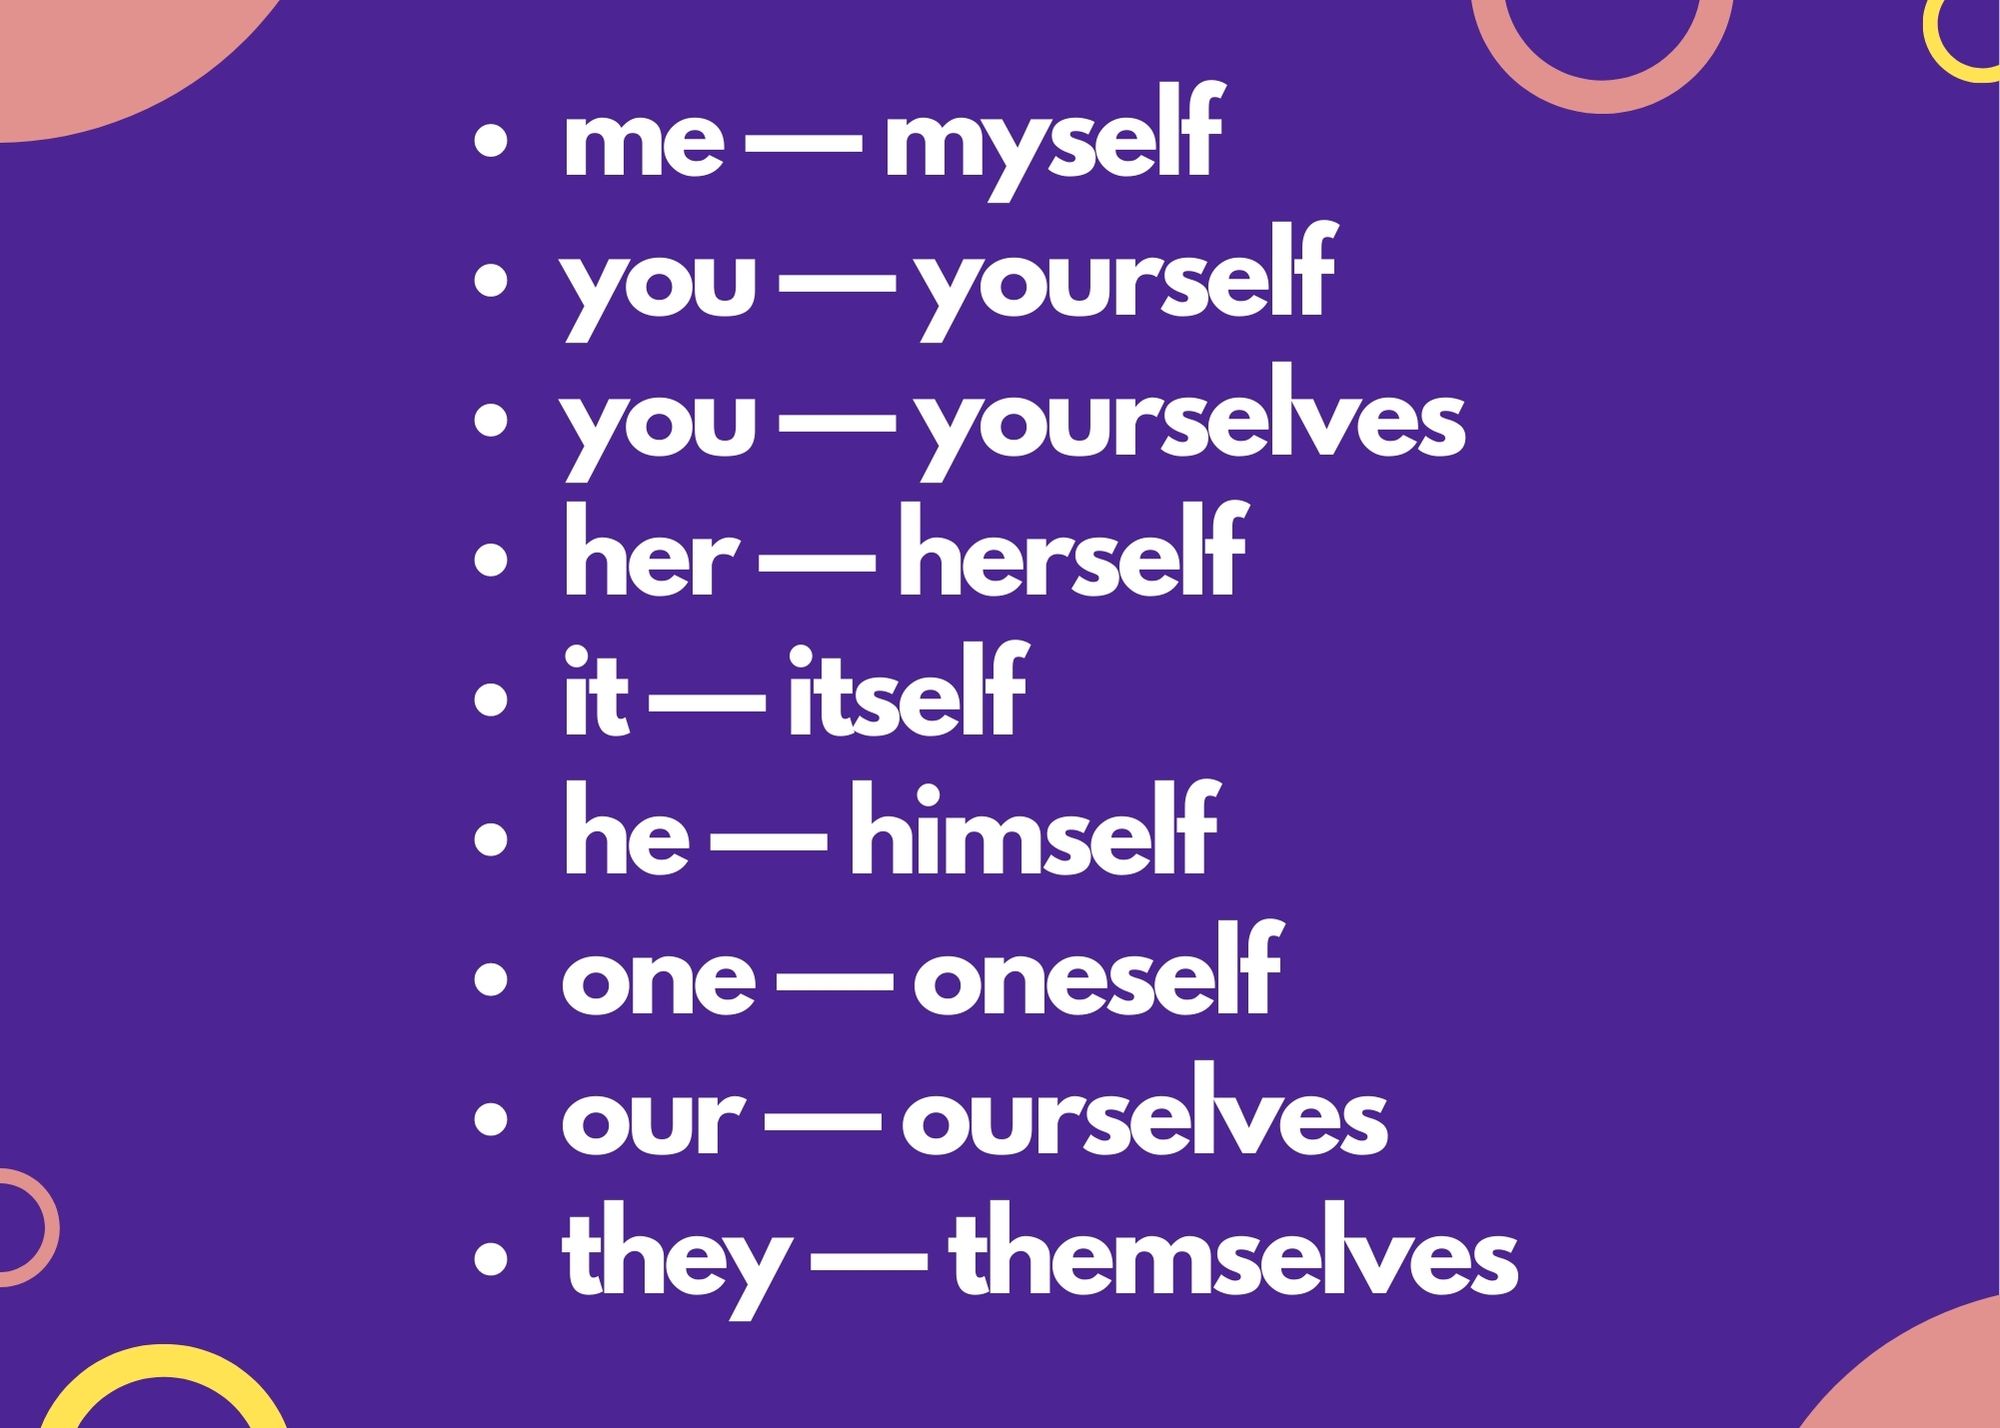 list of personal pronouns with their reflective pronouns: me — myself you — yourself you — yourselves her — herself it — itself he — himself one — oneself our — ourselves they — themselves